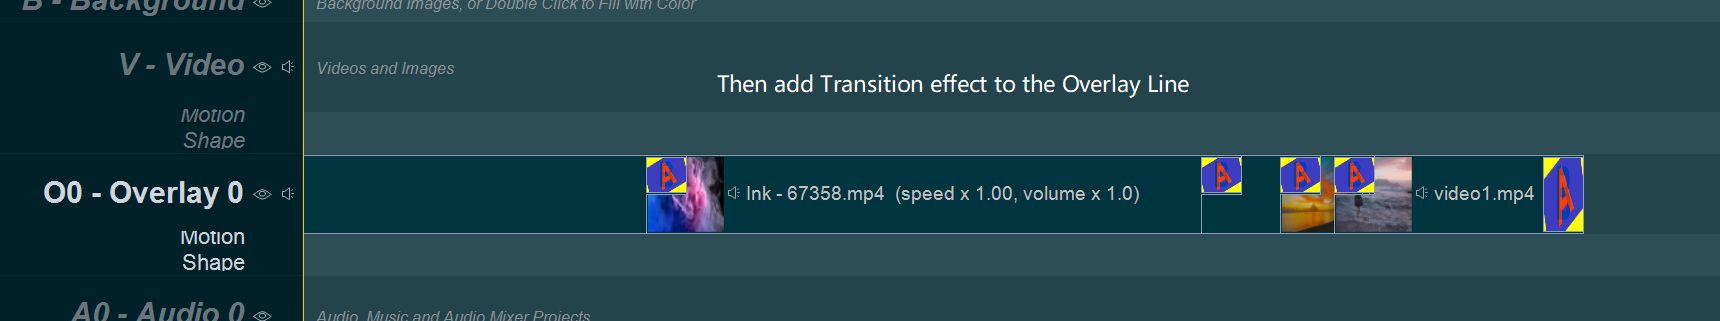 add transition effect to overlay line 03